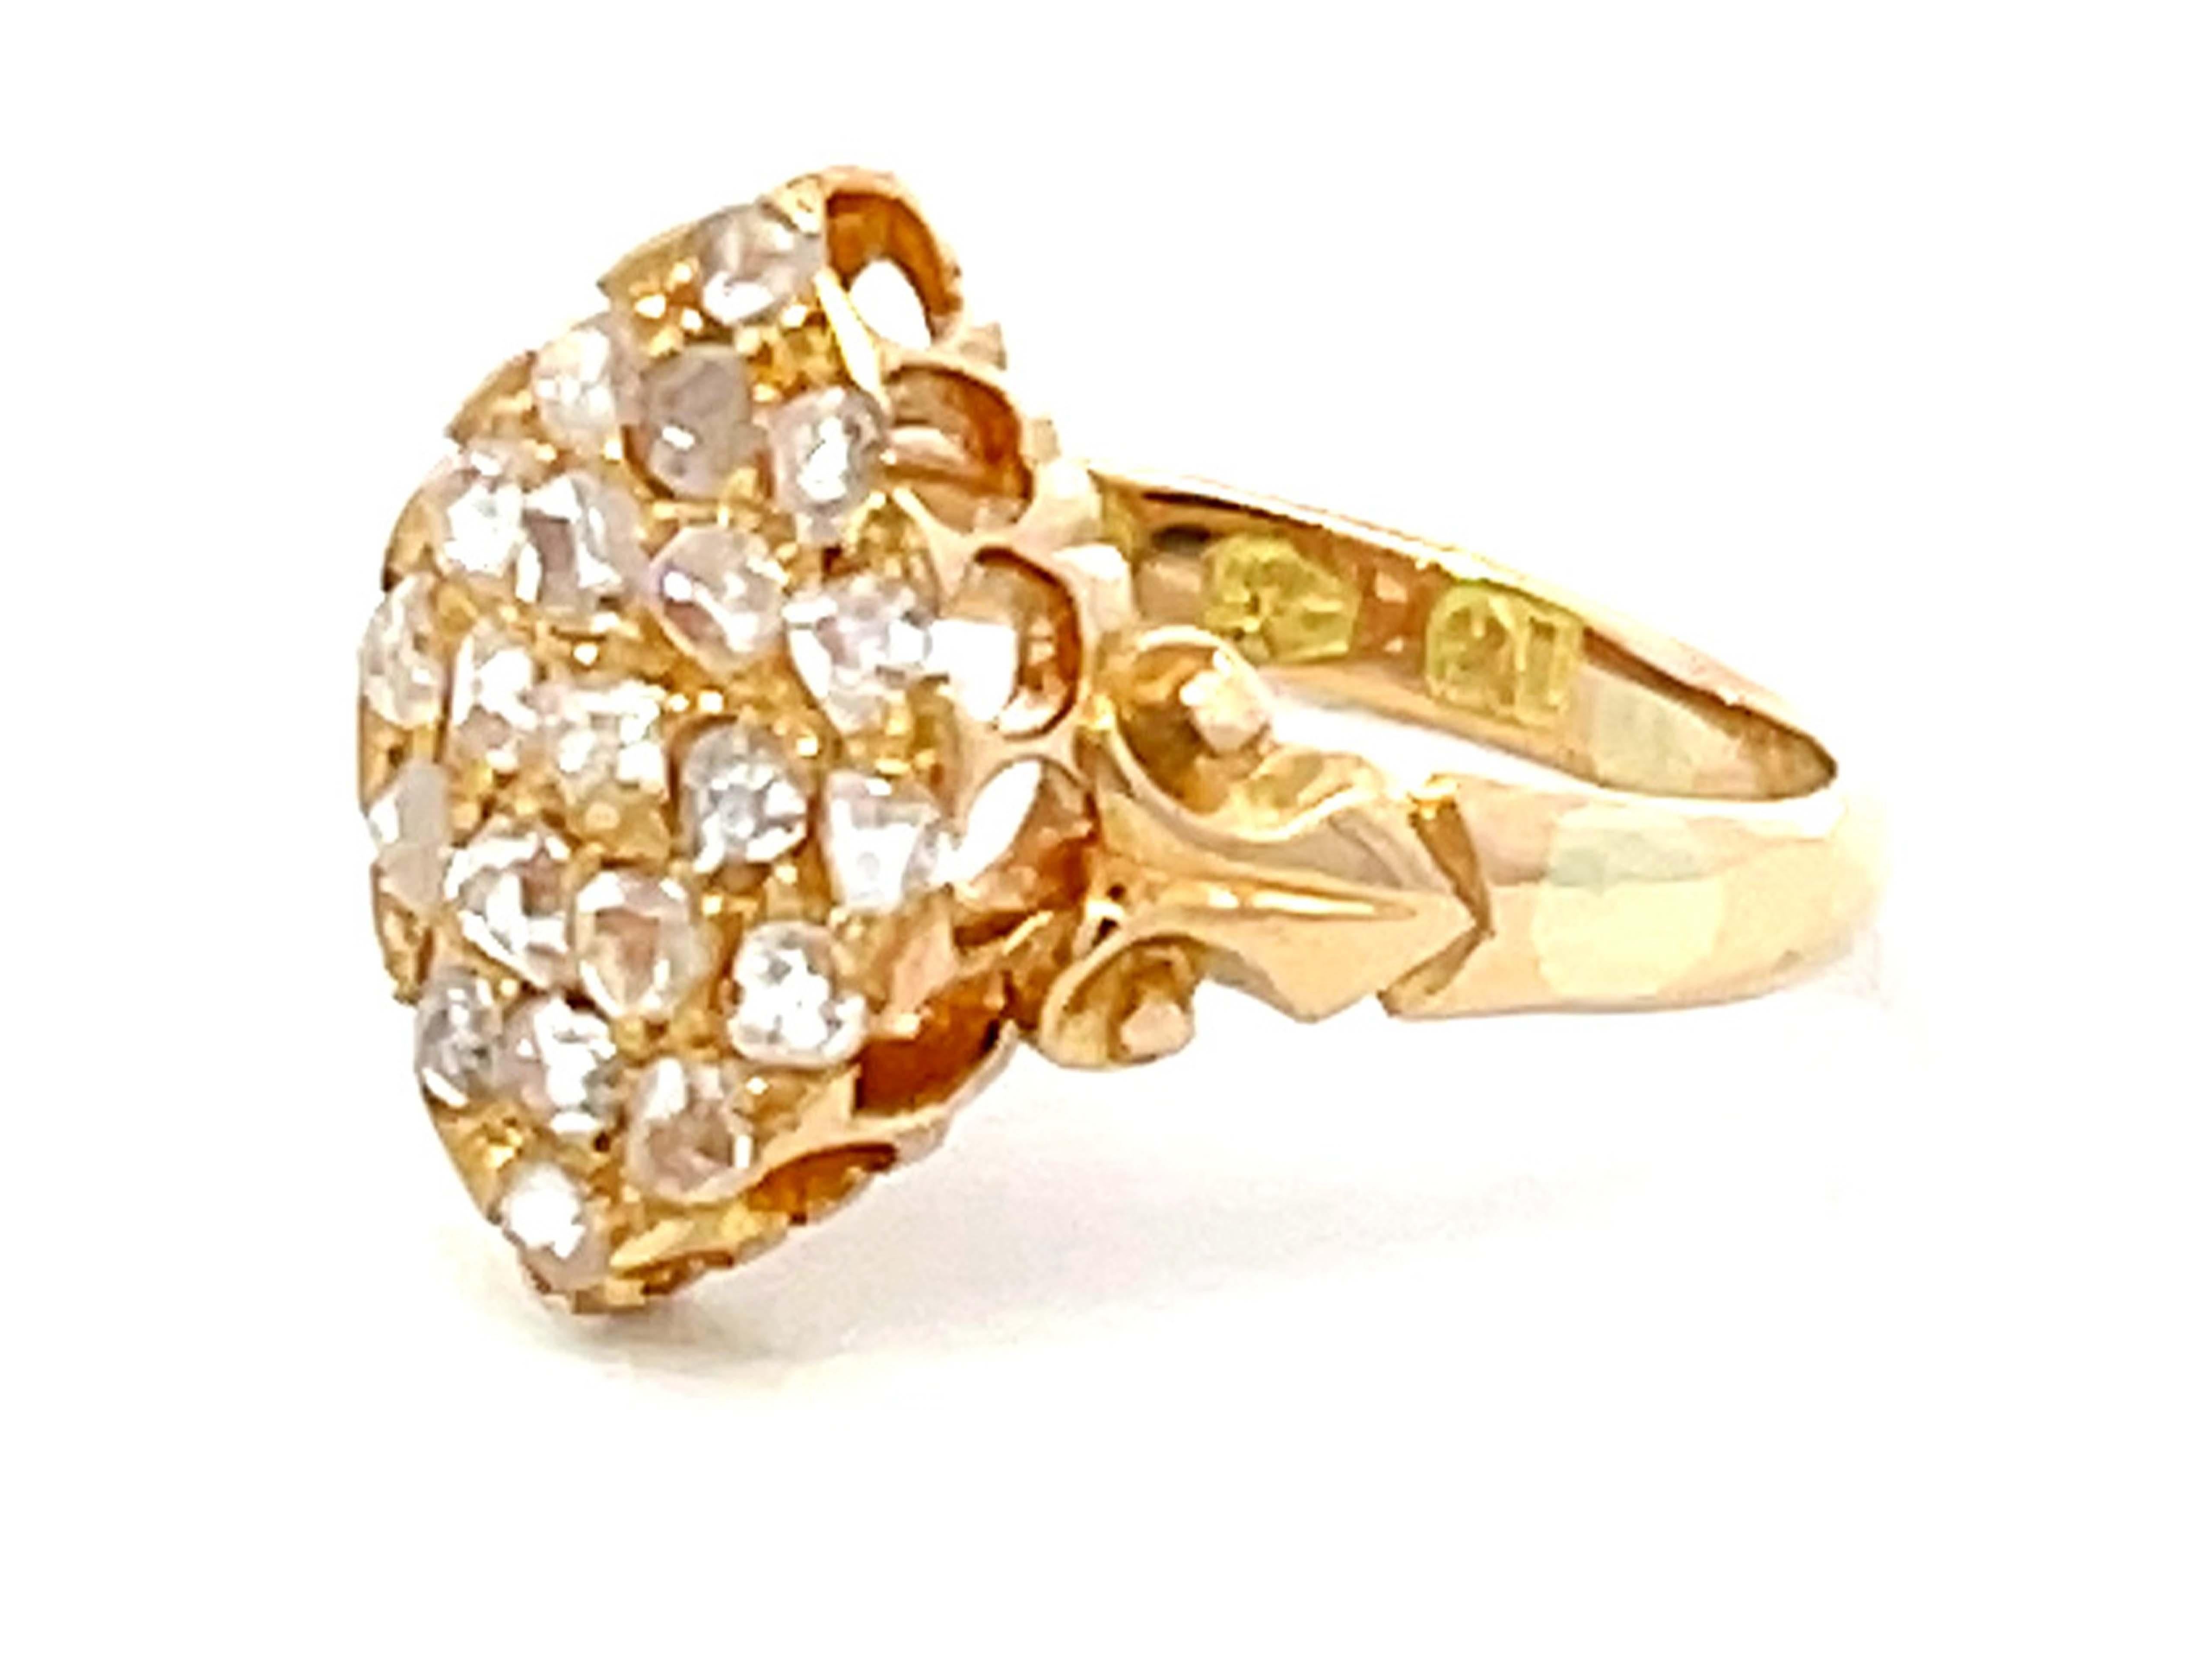 Antique European Rose Cut Diamond Ring in 18K Yellow Gold In Excellent Condition For Sale In Honolulu, HI